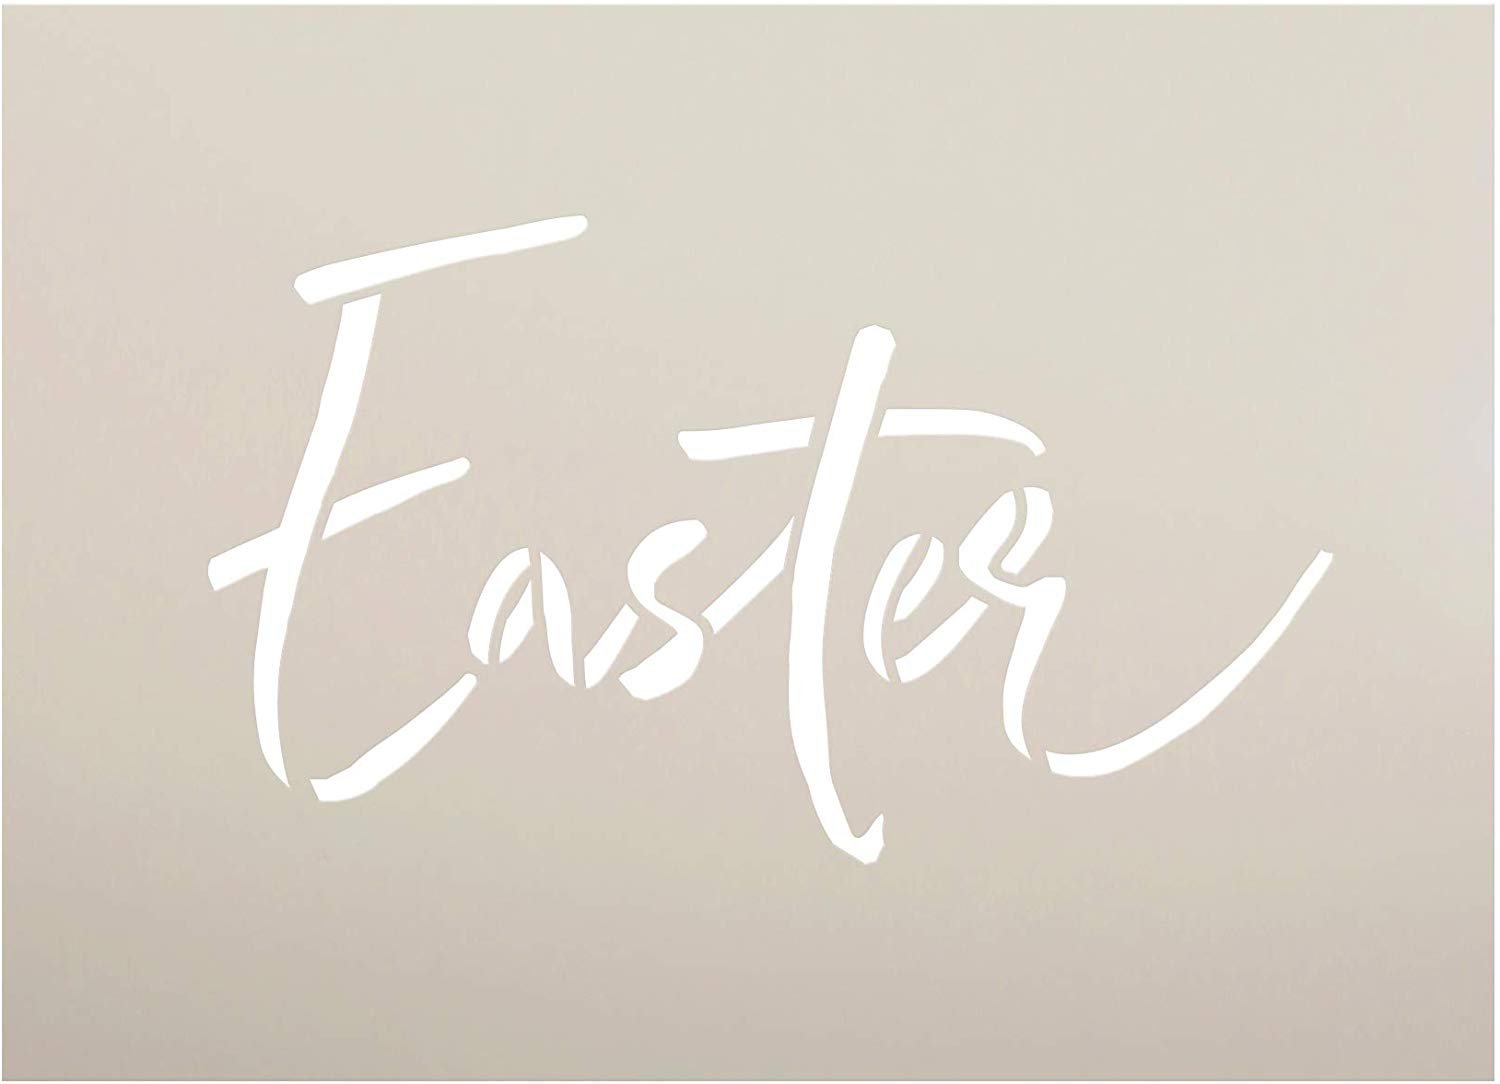 Easter Script Stencil by StudioR12  DIY Christian Spring Home Decor  Rustic Handwritten Word Art  Craft & Paint Farmhouse Wood Signs  Reusable Mylar Template  Select Size 13.5 x 9.75 inch - image 2 of 4